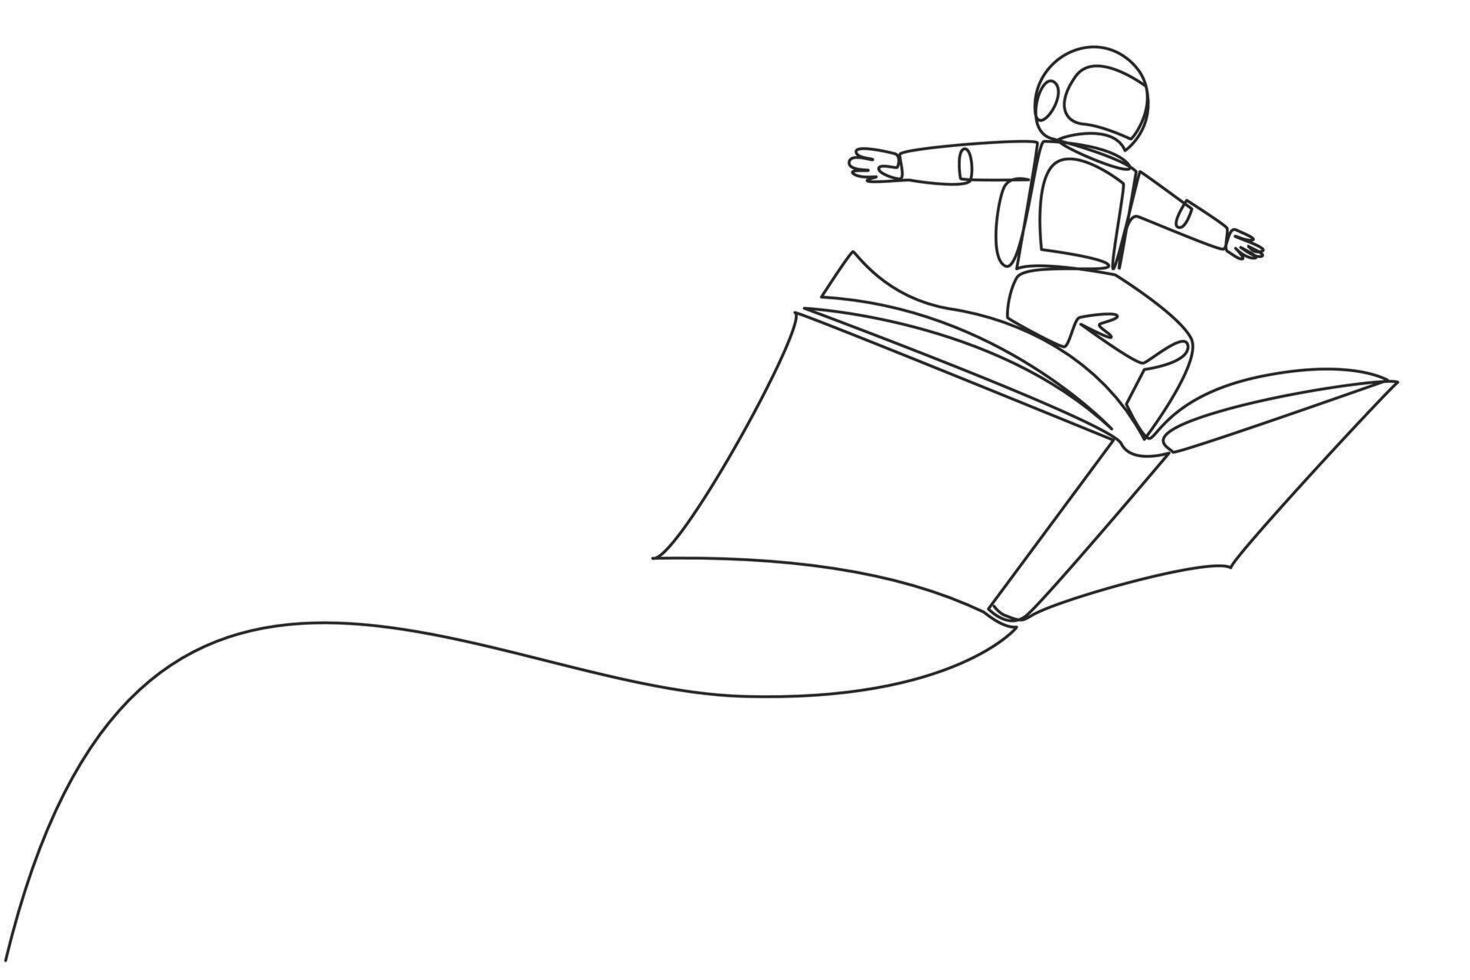 Continuous one line drawing astronaut standing on large flying open book. Like riding a cloud, able to fly as high as possible. Reading increase insight. Single line draw design illustration vector